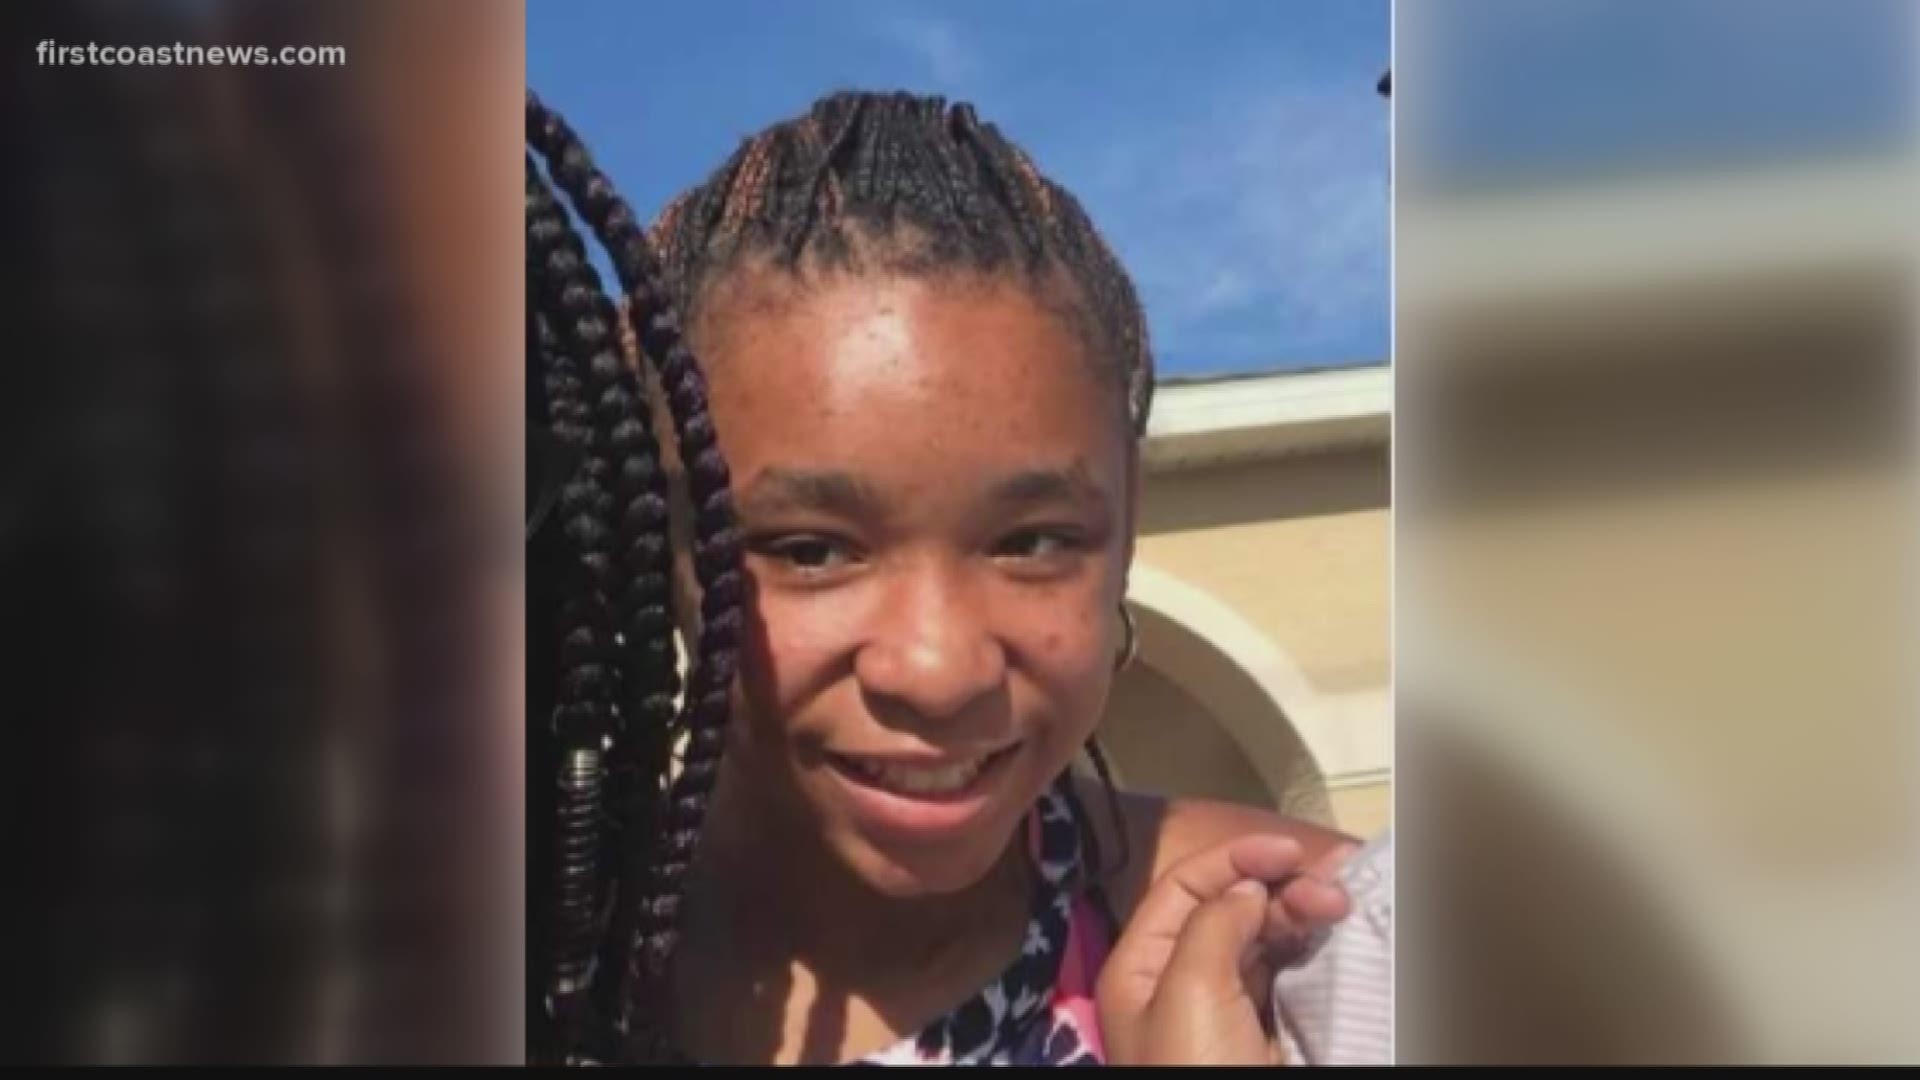 The St. Johns County Sheriff's Office is searching for a 12-year-old missing runaway child who was last seen Sunday.